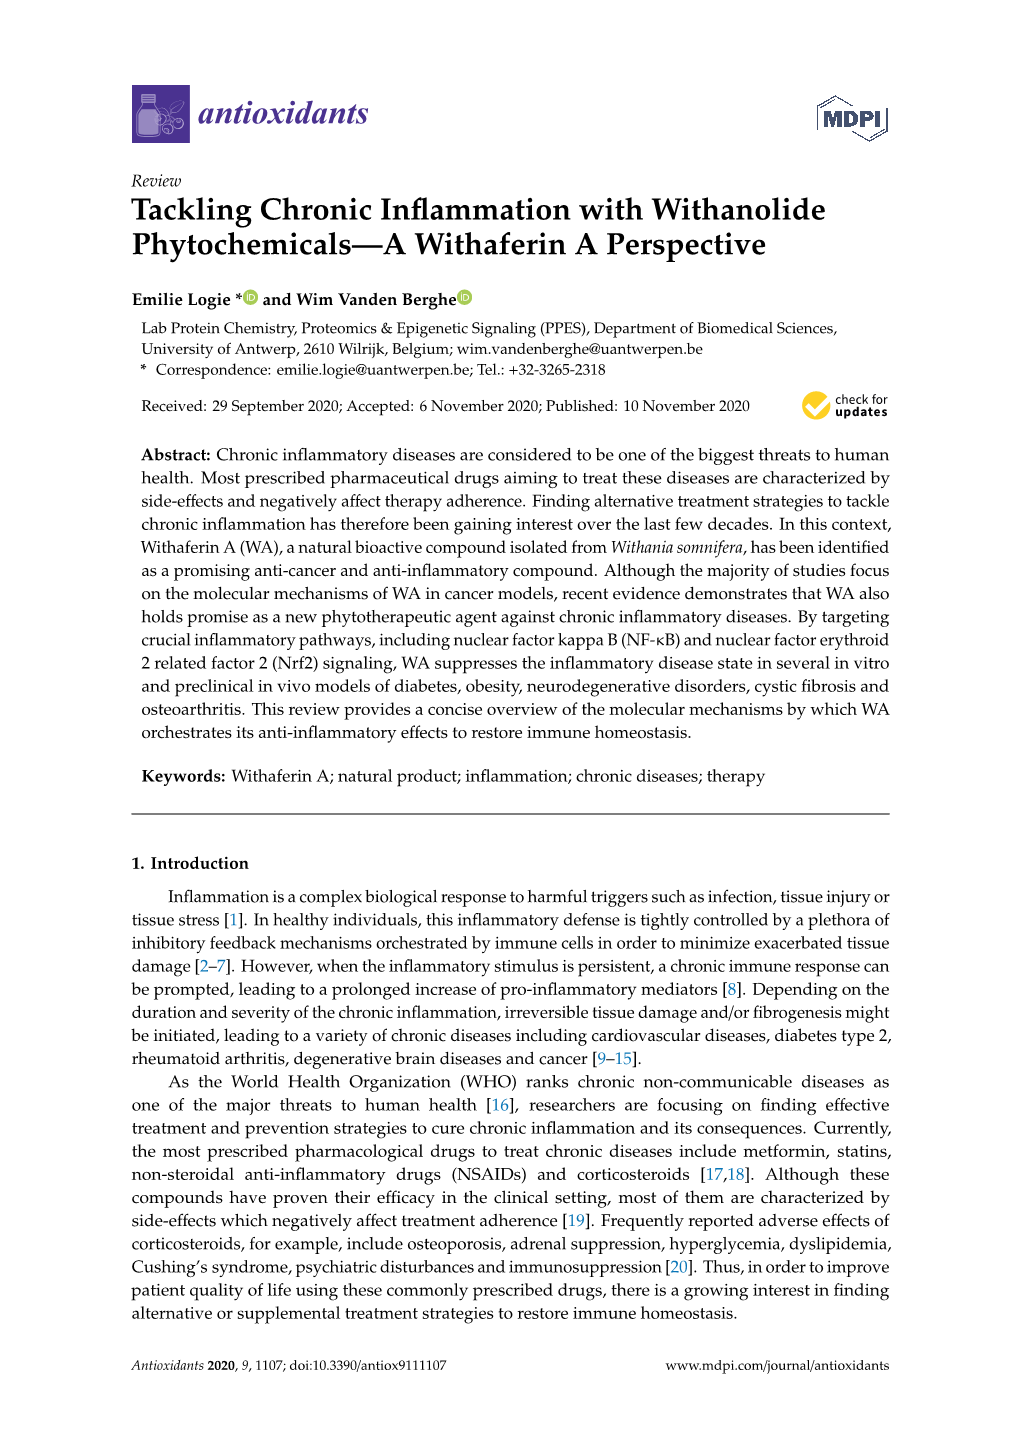 Tackling Chronic Inflammation with Withanolide Phytochemicals—A